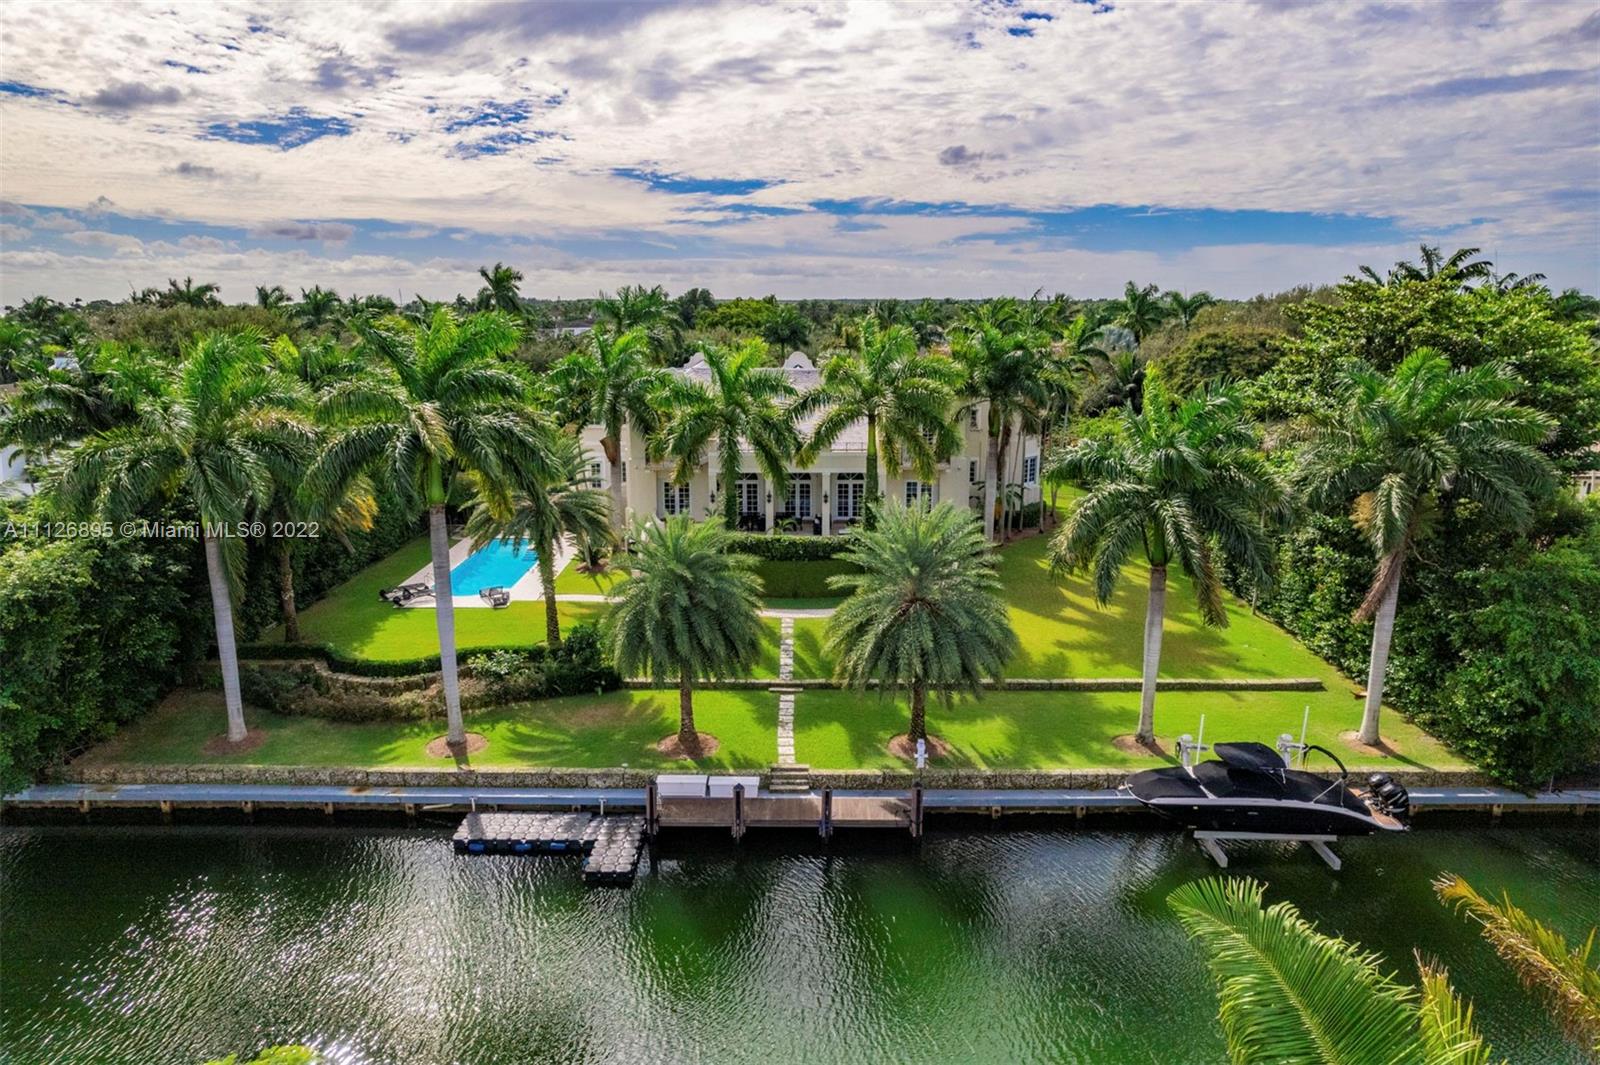 585 Arvida Parkway is a spectacular 12,102 Sq.Ft. waterfront residence with 6 bedrooms, 5 full and 2 half baths, on beautifully landscaped grounds in the prestigious community of Gables Estates. Featuring east and west wings, the exterior facade melds Dutch and Island influences. The elegant interiors include double height ceilings, stunning living and formal dining rooms, and chef's kitchen with Gaggenau appliances and breakfast area. The main suite has a luxurious marble bath with a long-mirrored vanity, jacuzzi and multi-jet shower, and two walk-in closets. Other special features include an elevator, family room, library, two fireplaces and 4-car garage. The resort-style outdoors have covered terraces, a pool and 180 feet of waterfront, with direct access and no bridges to Biscayne Bay.